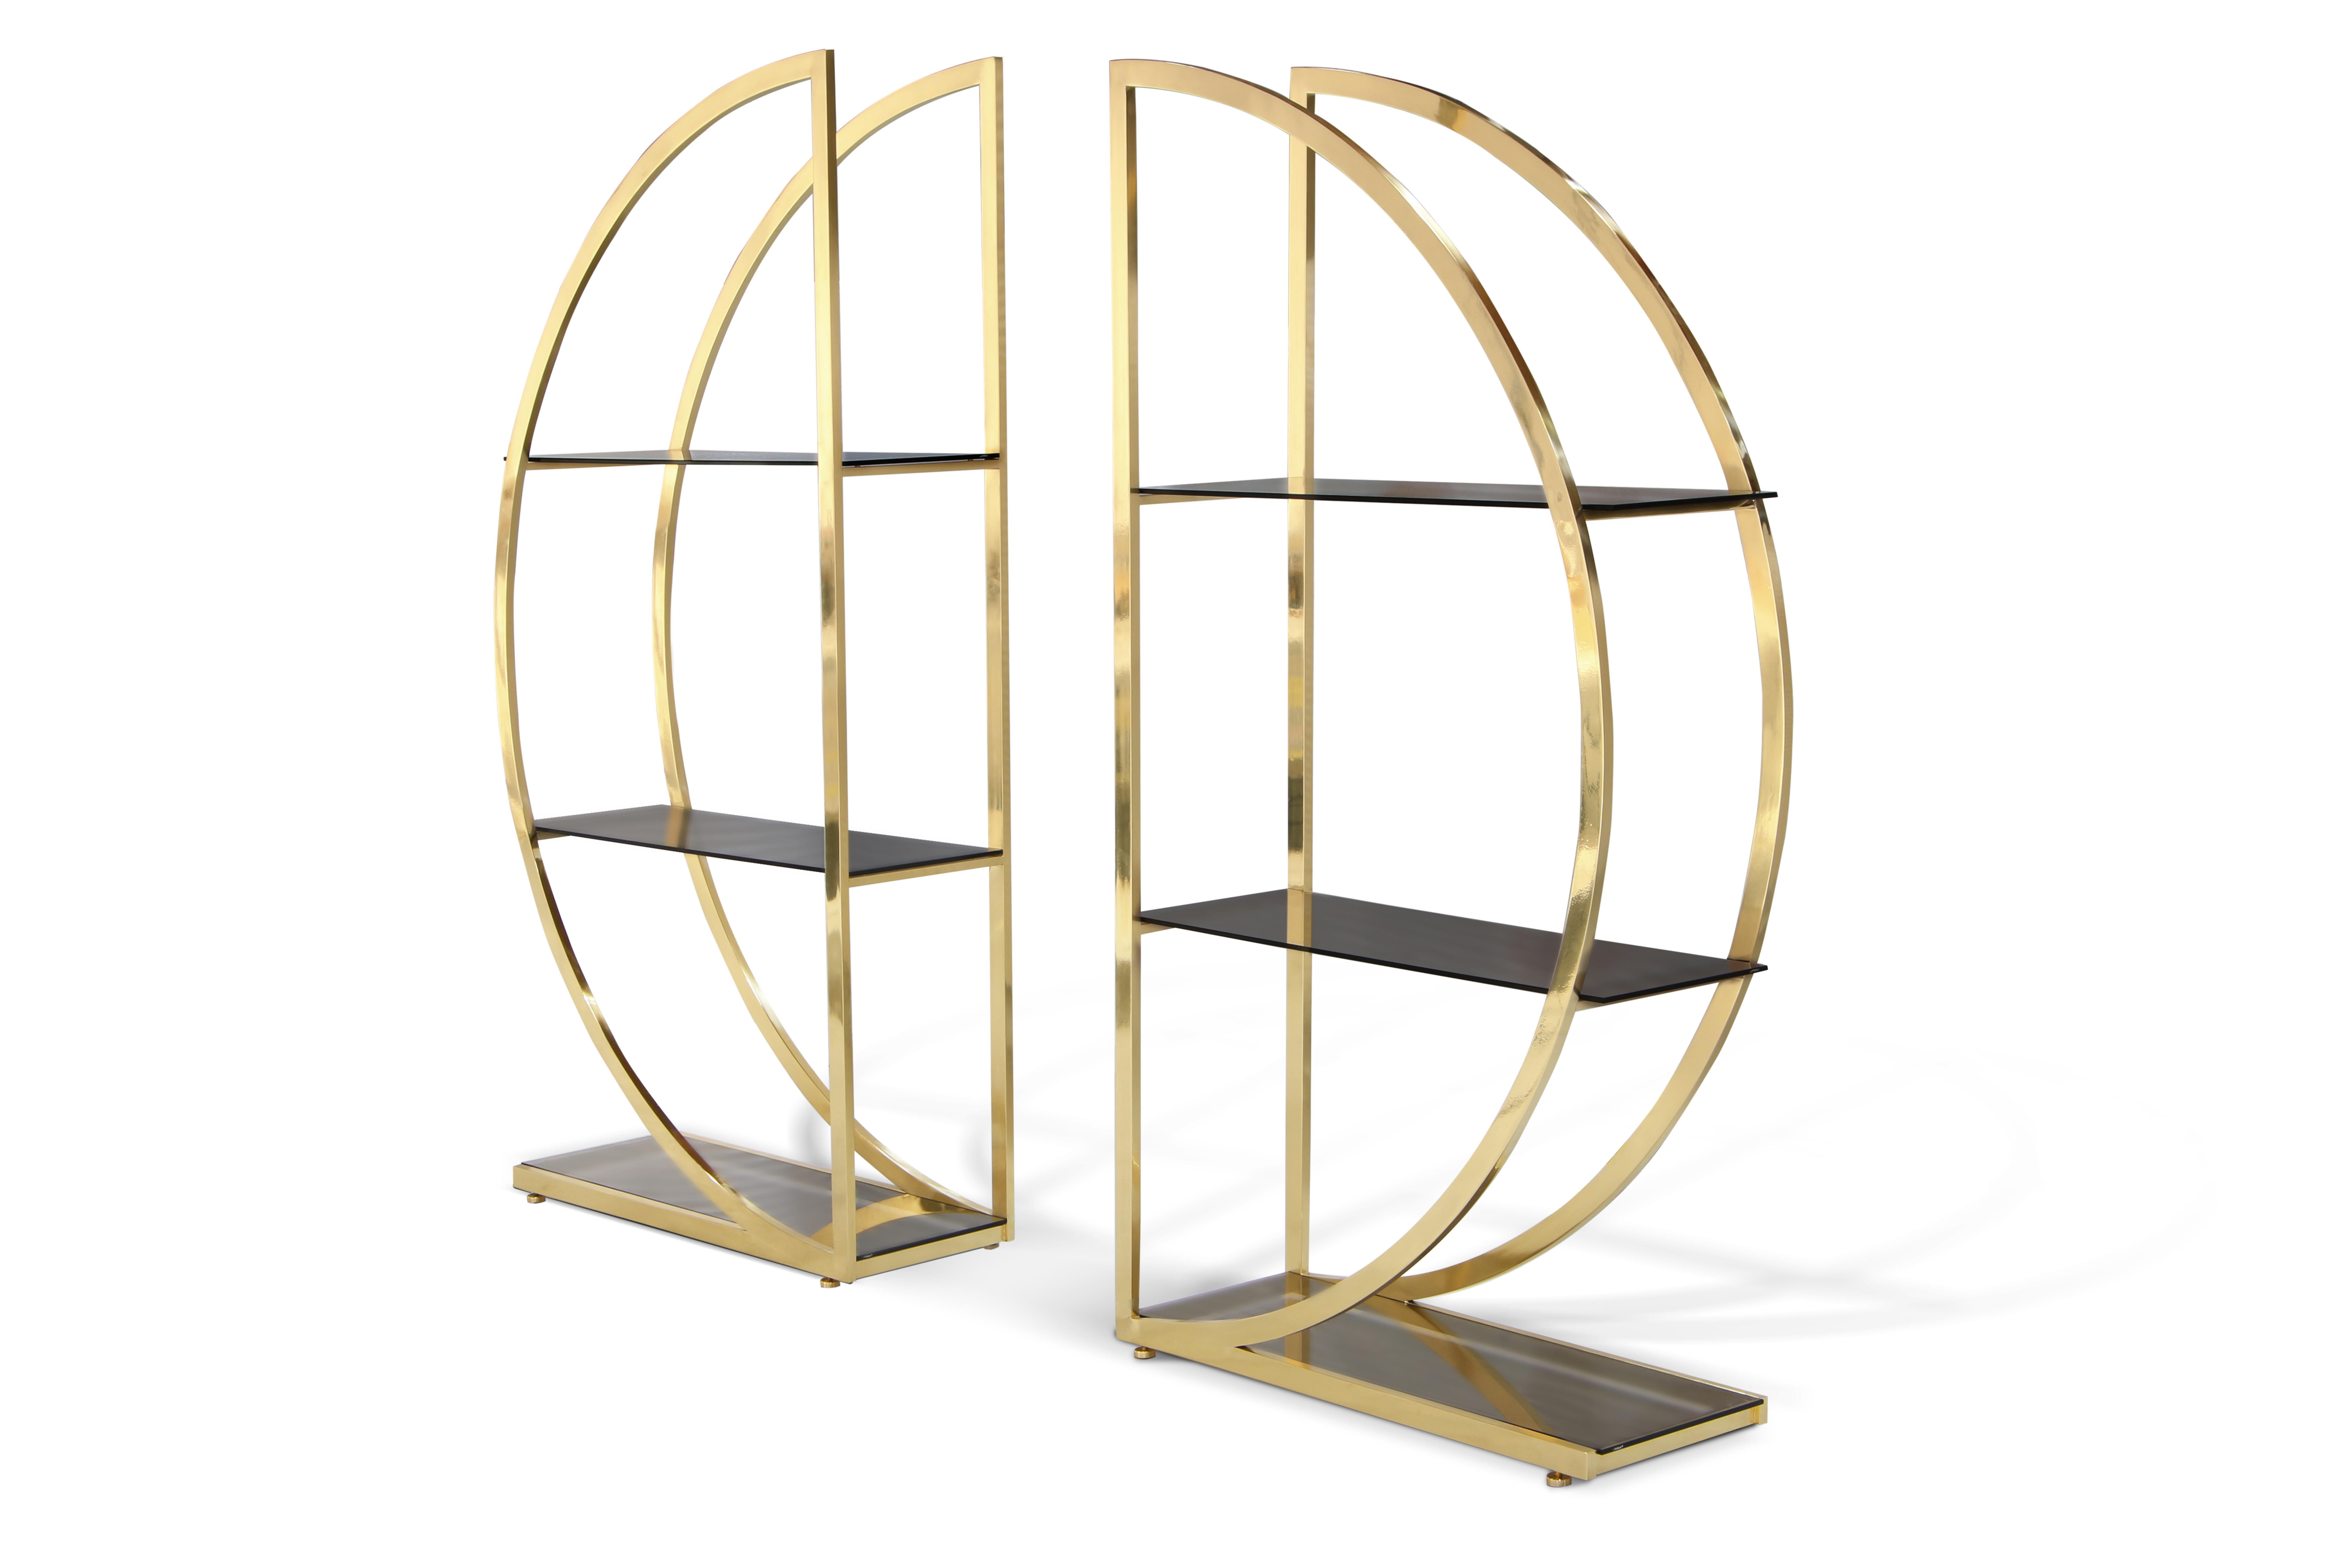 Decadence is a Bookcase with two ornate metal semi-circles joined in a glamorous union by sleek glass shelves and her backless design allows for the perfect canvas to store your simple pleasures.

Structure: Polish Brass 
Shelves: Bronze